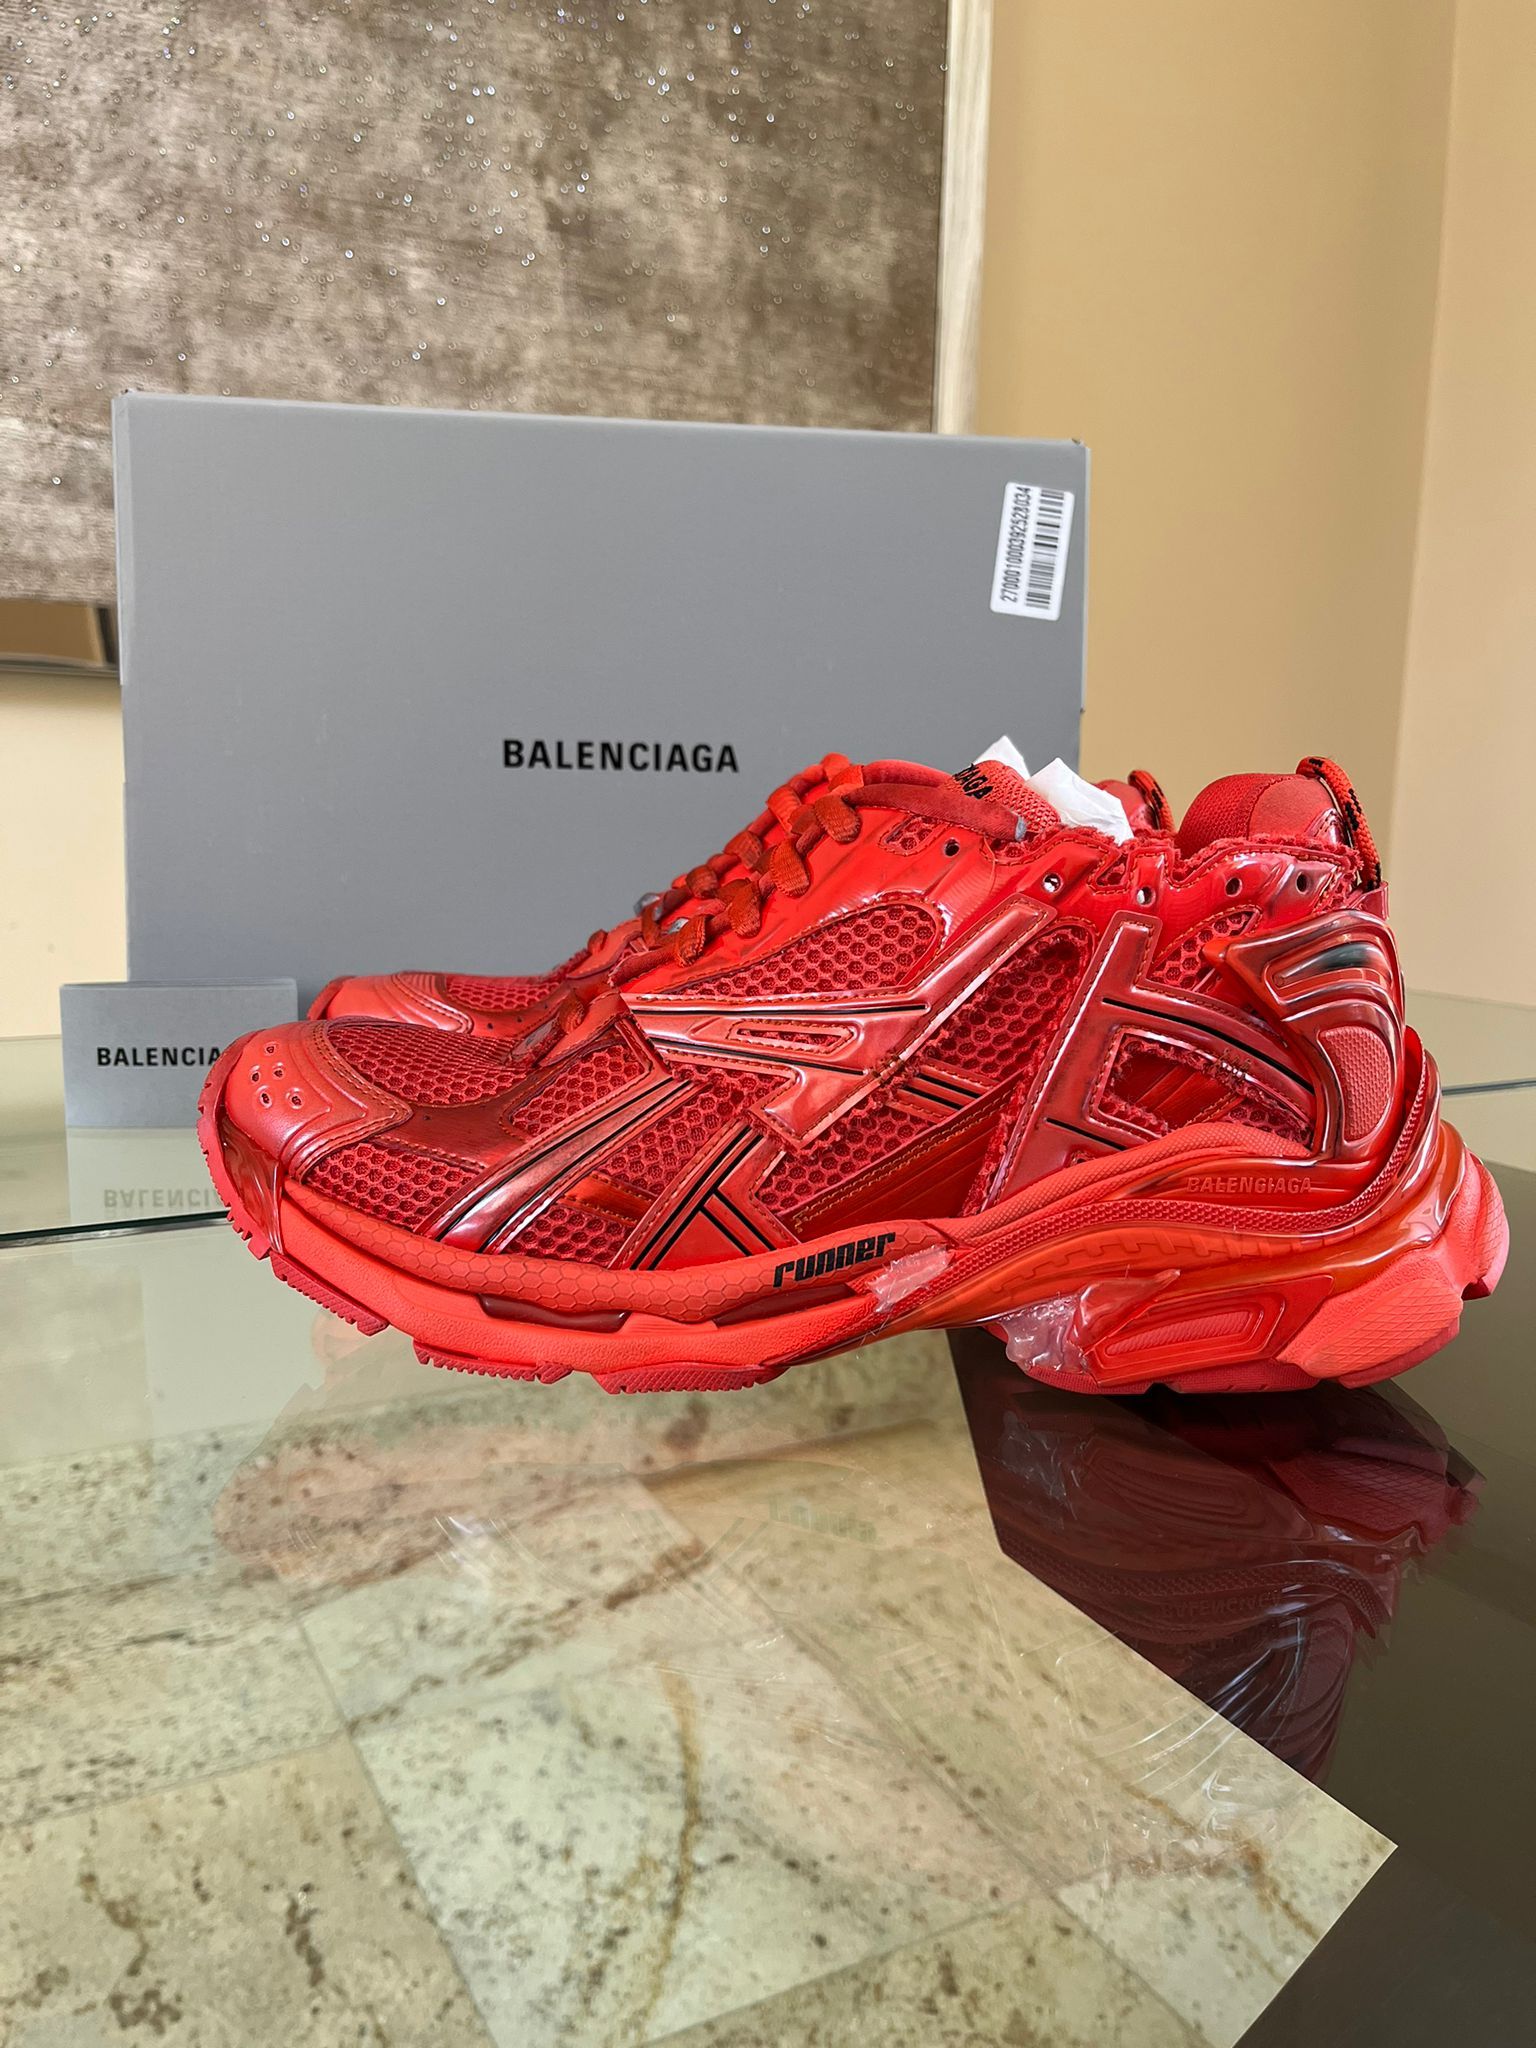 Balenciaga Men's Track Caged Clear Sole Sneakers Red Blk White Size 42 EU 9  US